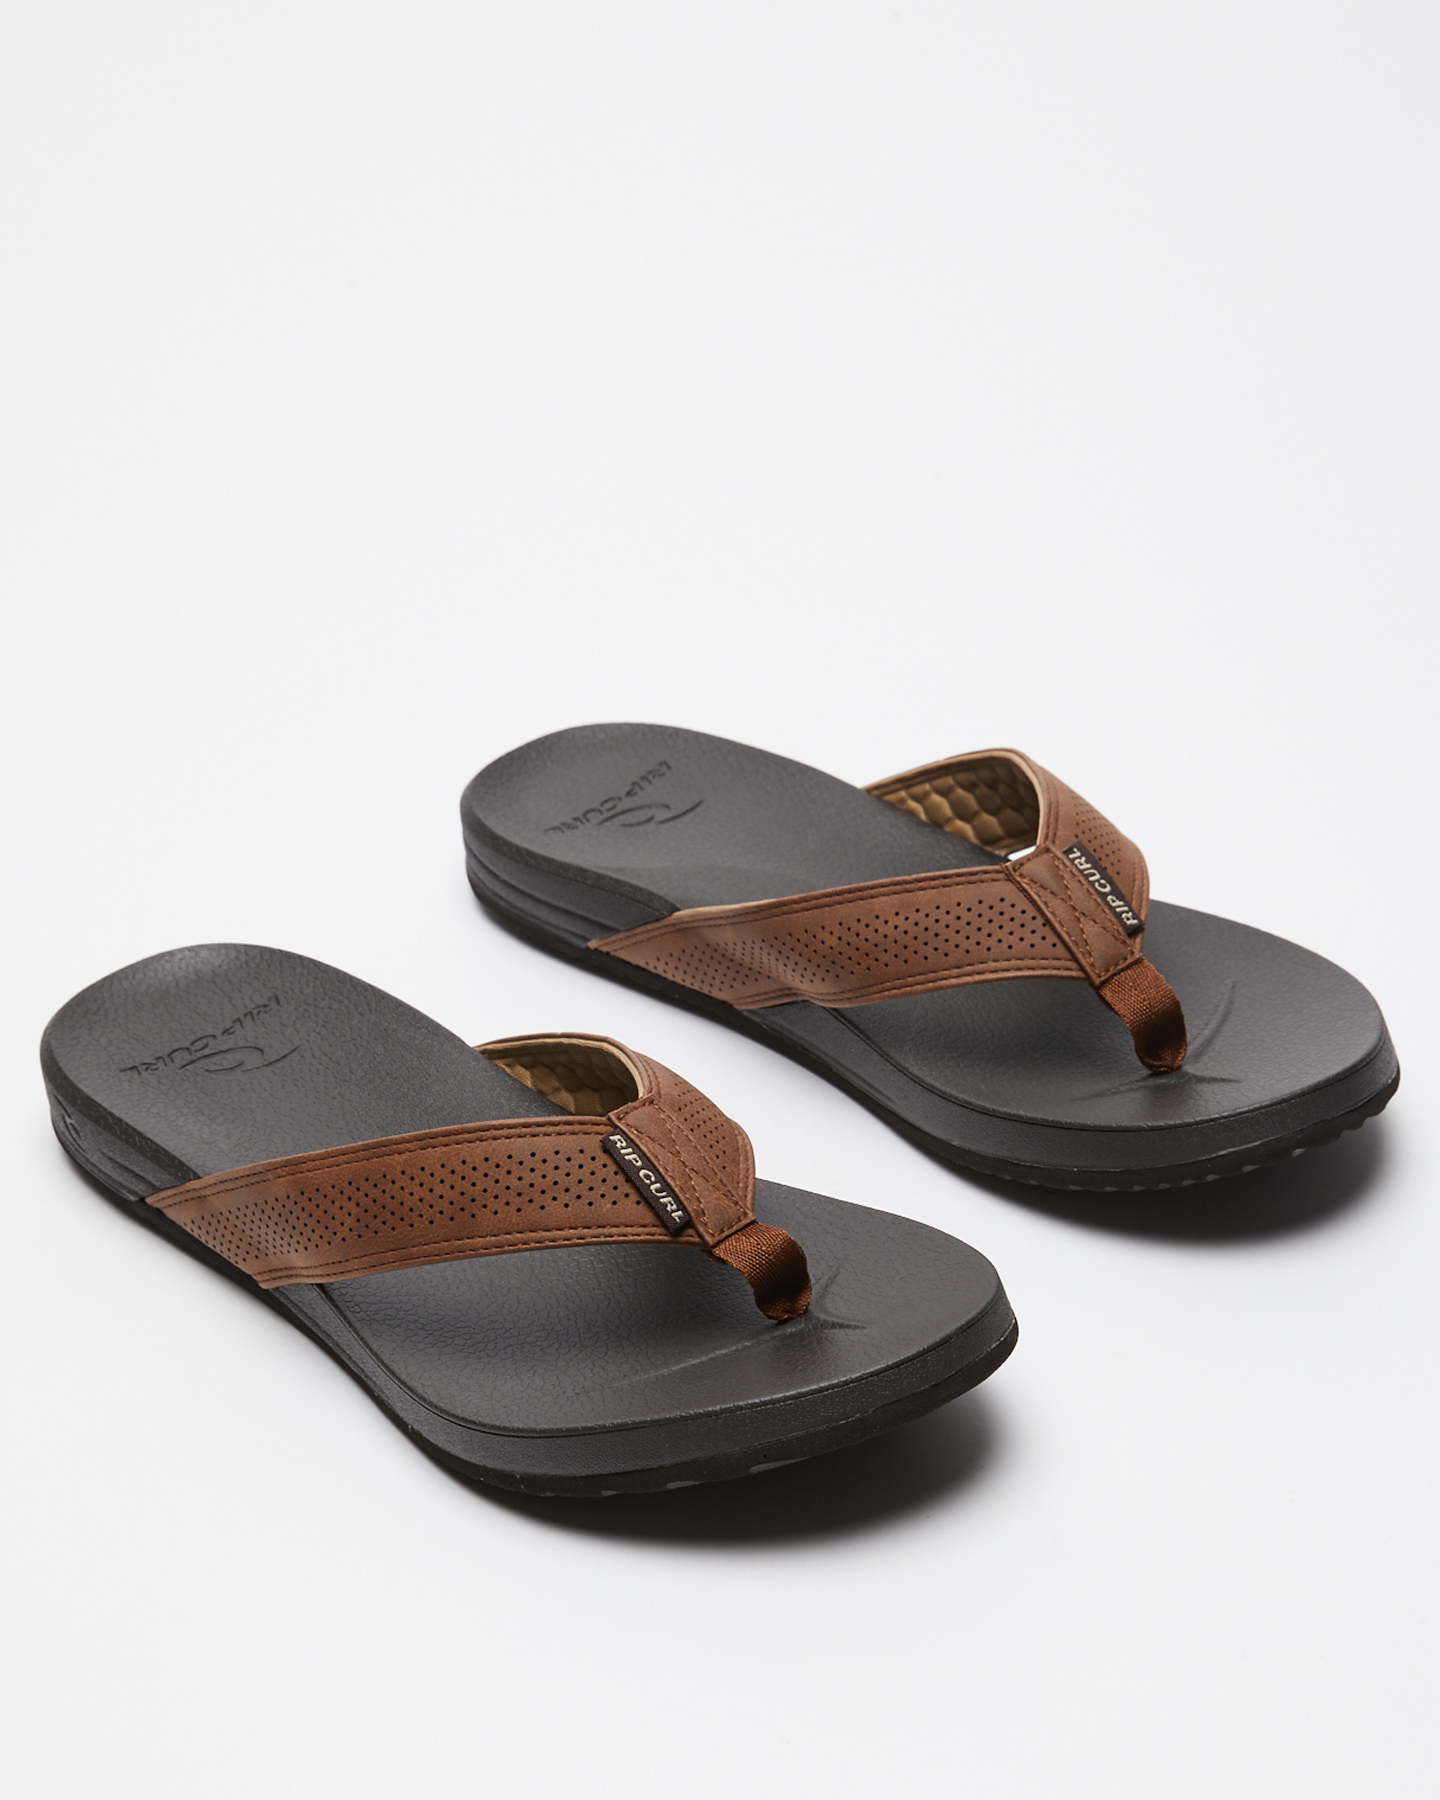 Rip Curl Soft Sand Open Toe - Brown | SurfStitch